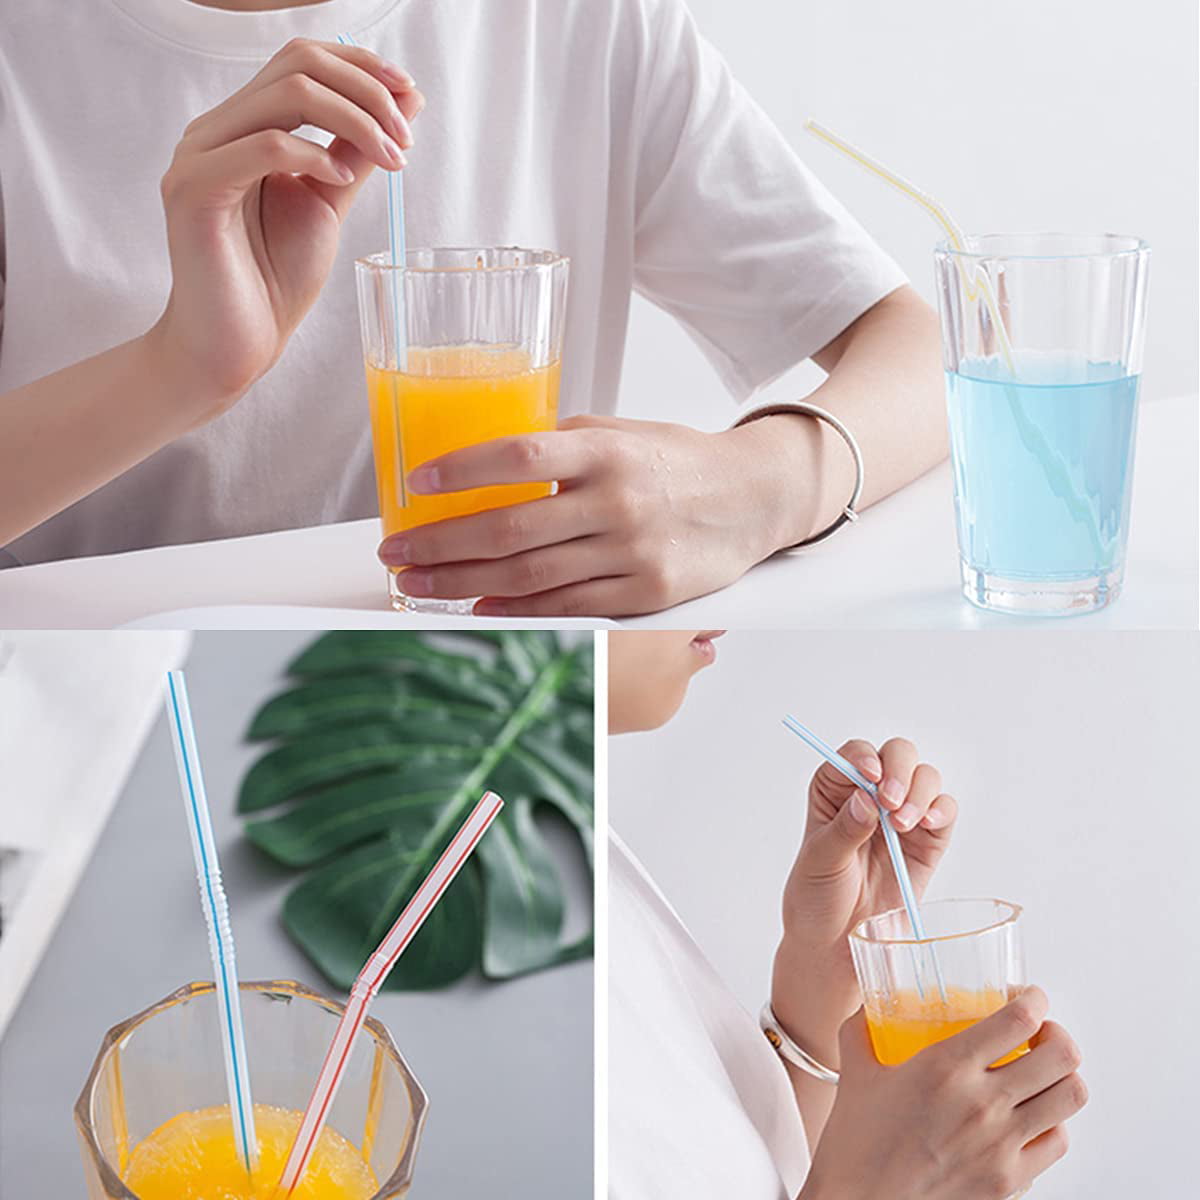 RXING 100pcs Flexible Disposable Plastic Straws Home Parties Bar Beverage Shops Home Straws for Kids and Adults 